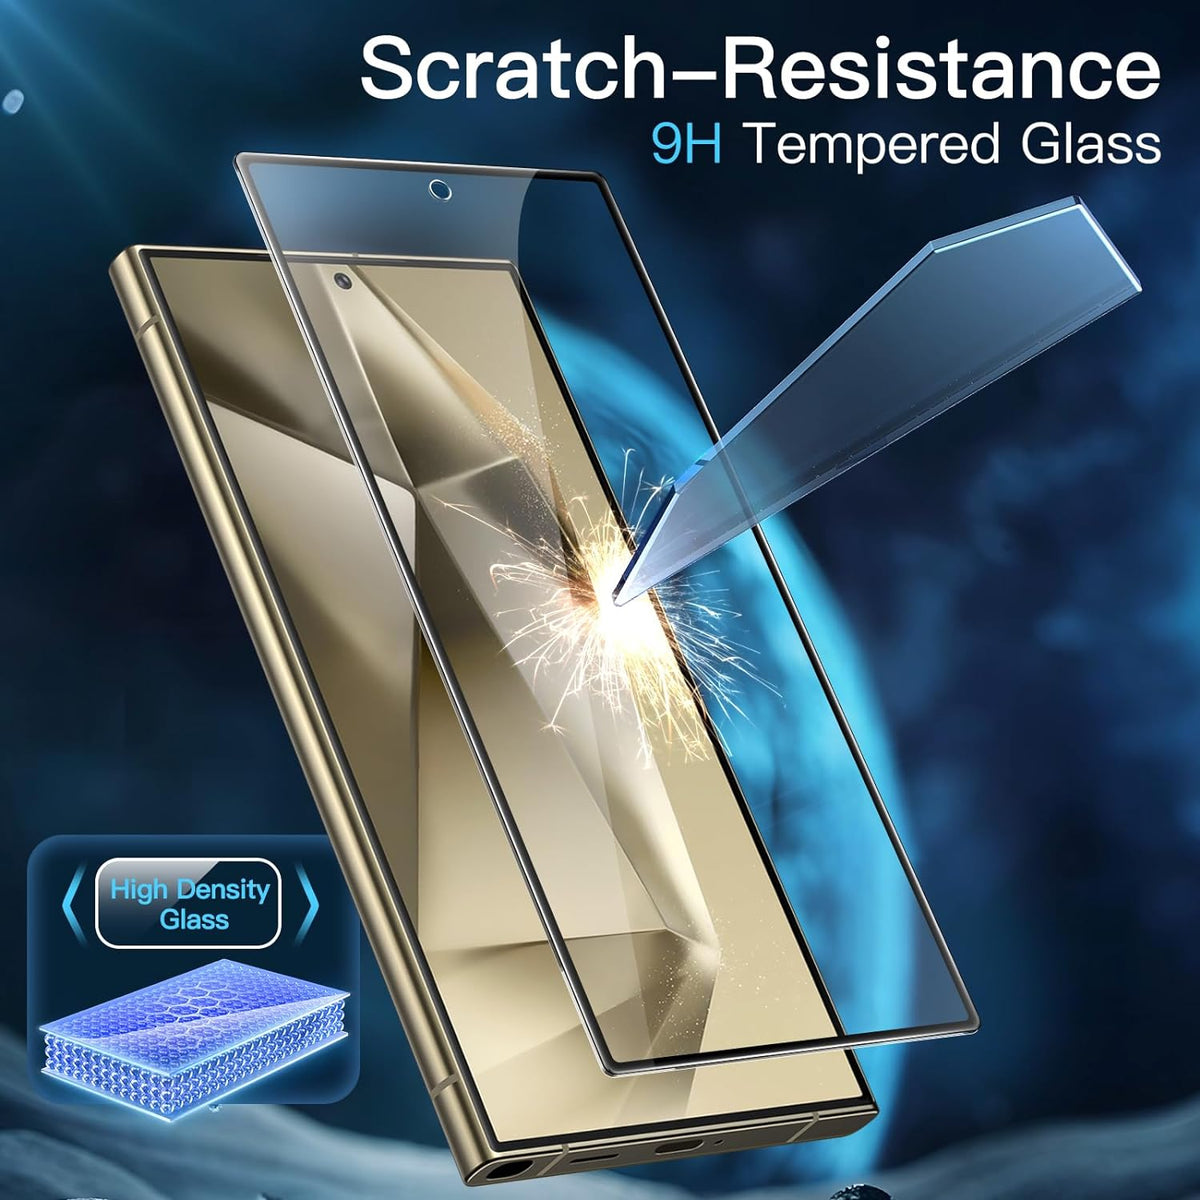 S24 UltraScreen Protector 2.5D Clear Tempered Glass For Samsung Galaxy